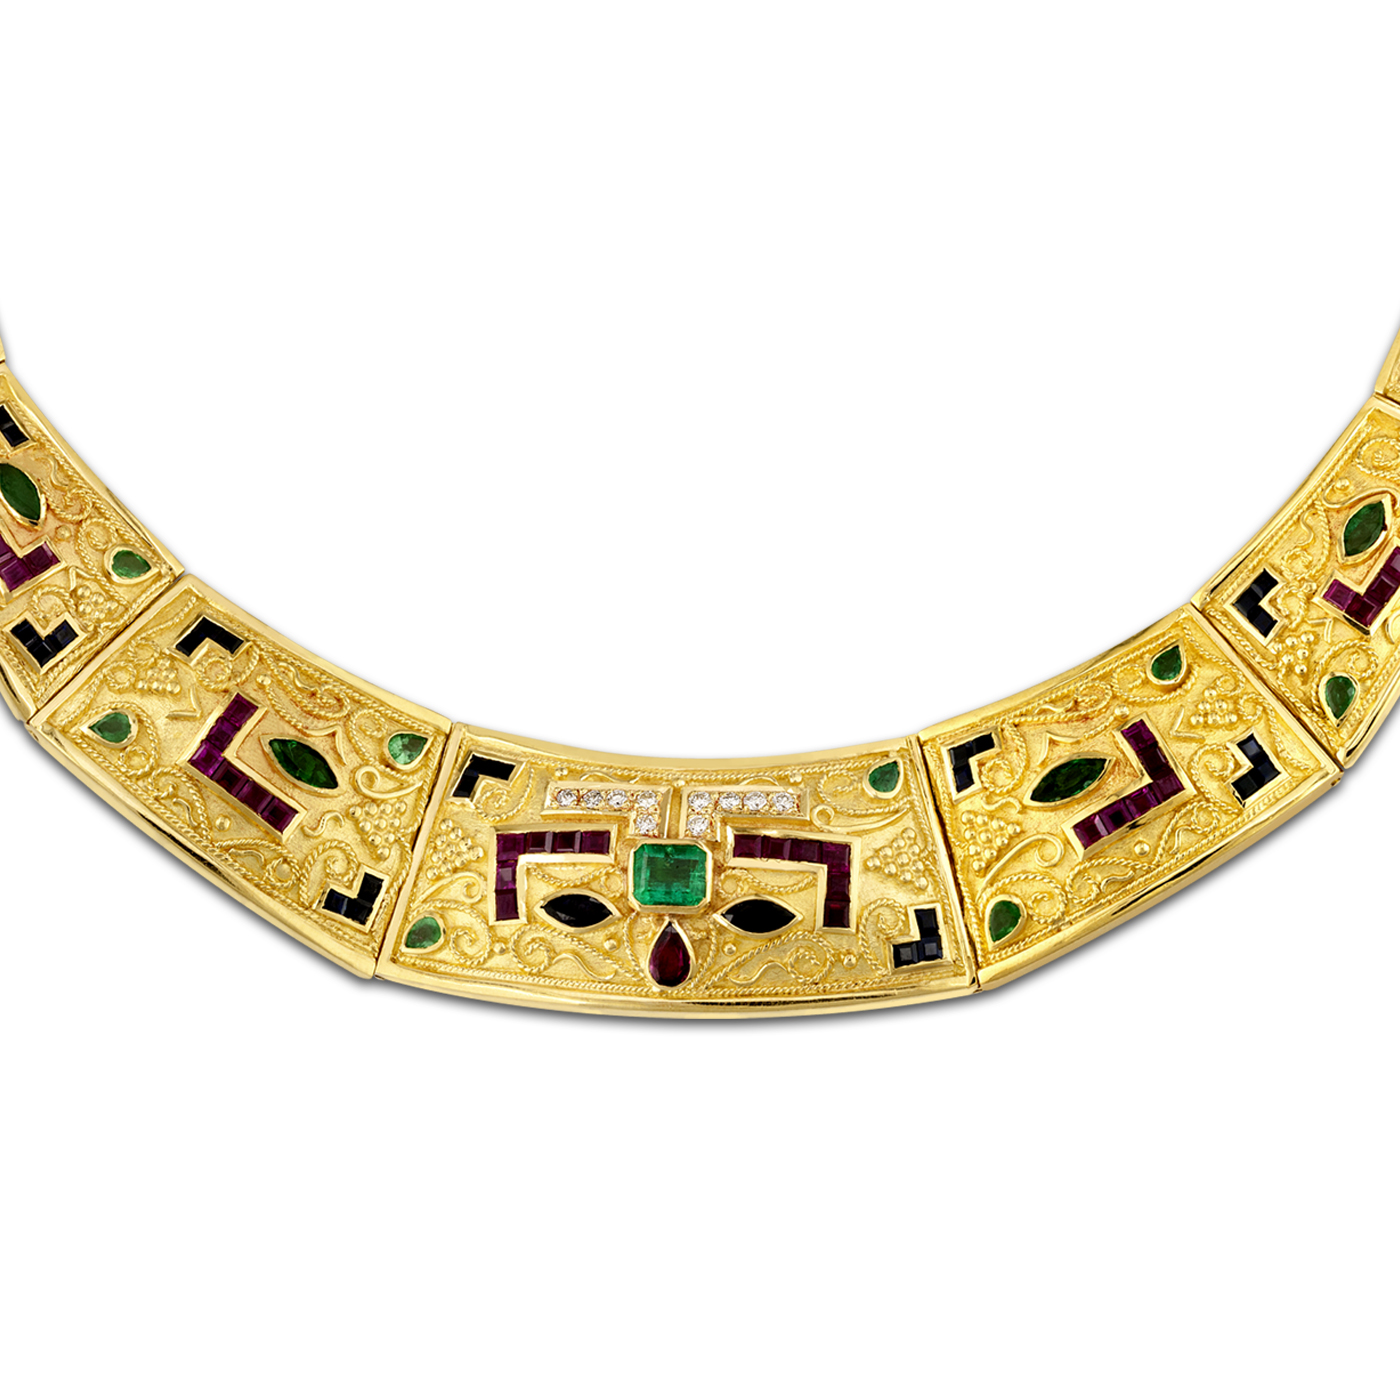 Imperial gold necklace with precious stones